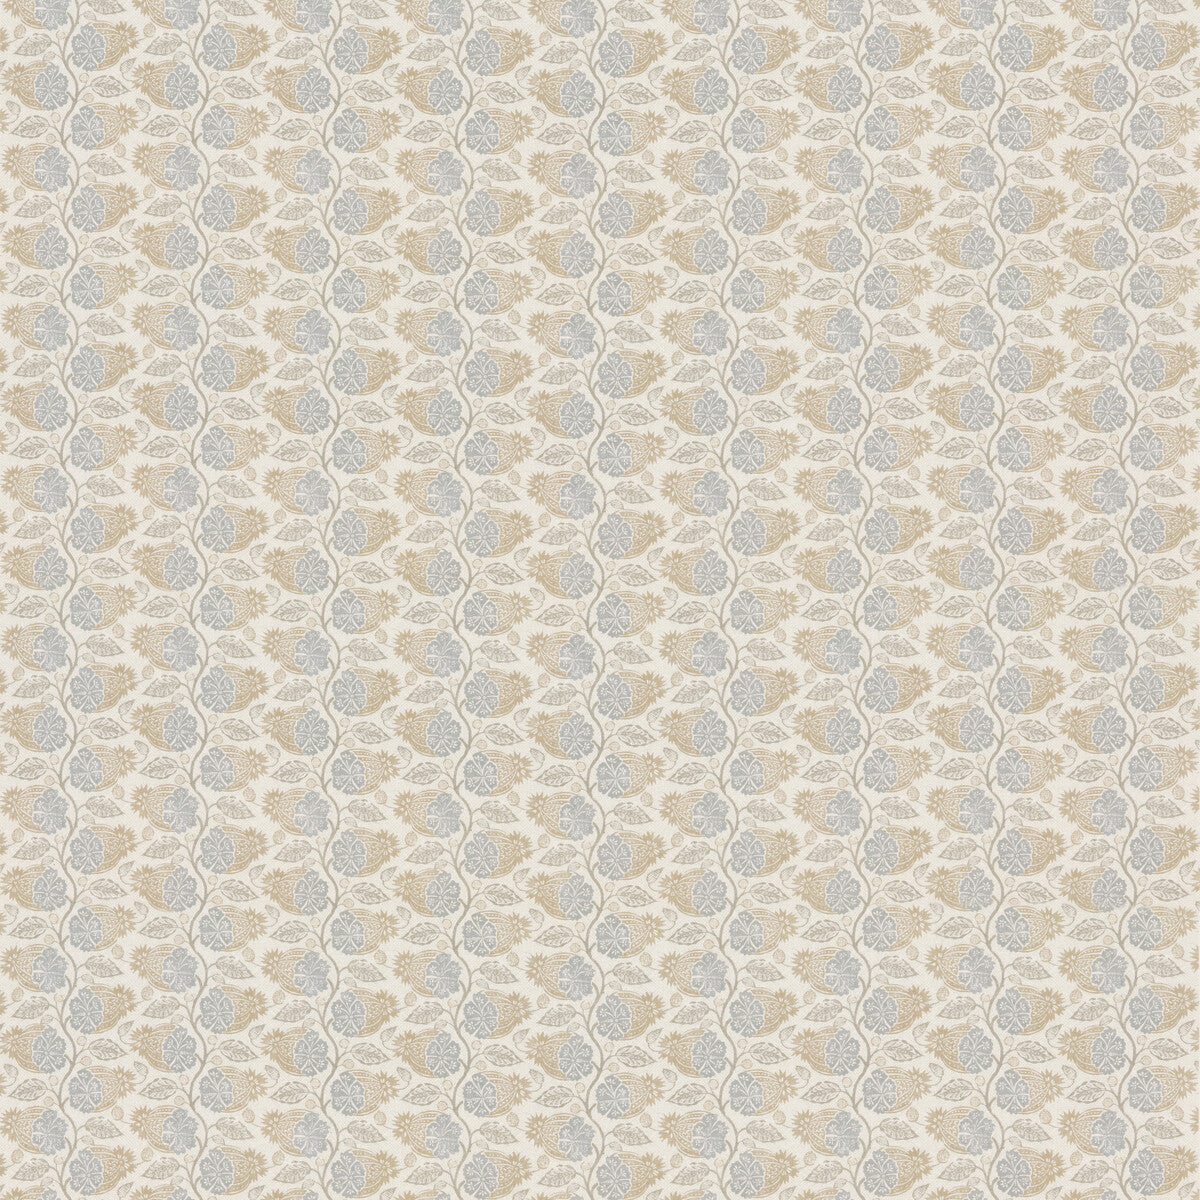 Calcot fabric in blue/sand color - pattern BP11000.5.0 - by G P &amp; J Baker in the House Small Prints collection